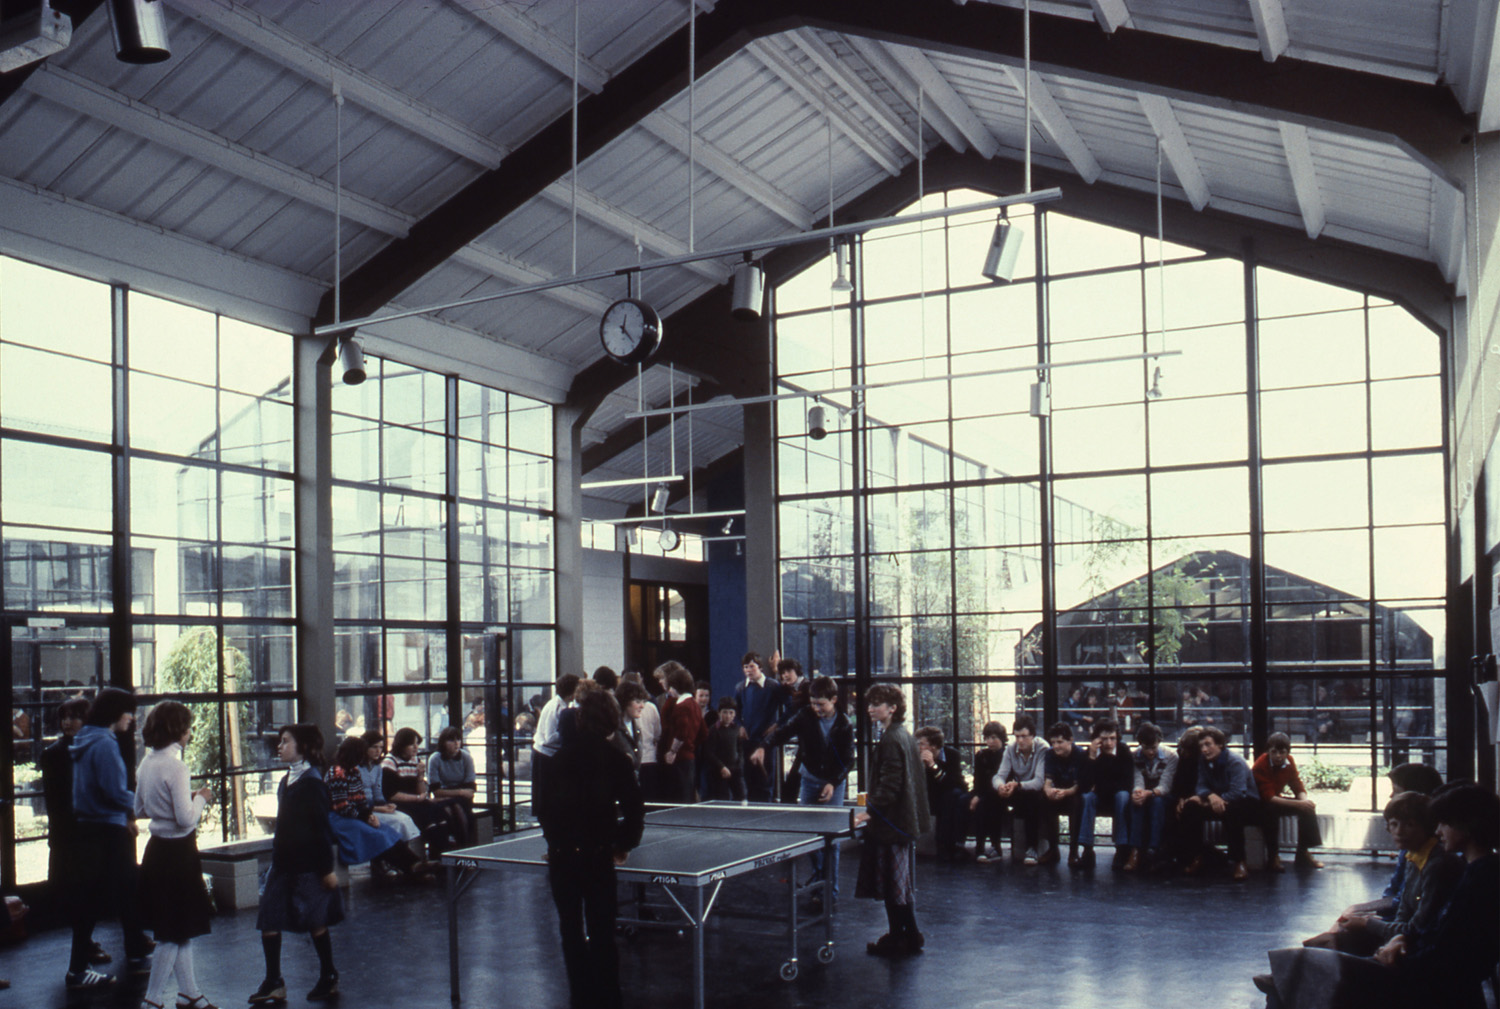 View of Social Space, St Brendan’s Community School, Birr, Co Offaly, Ireland, Peter and Mary Doyle Architects. Copyright: John Donat / RIBA Collections